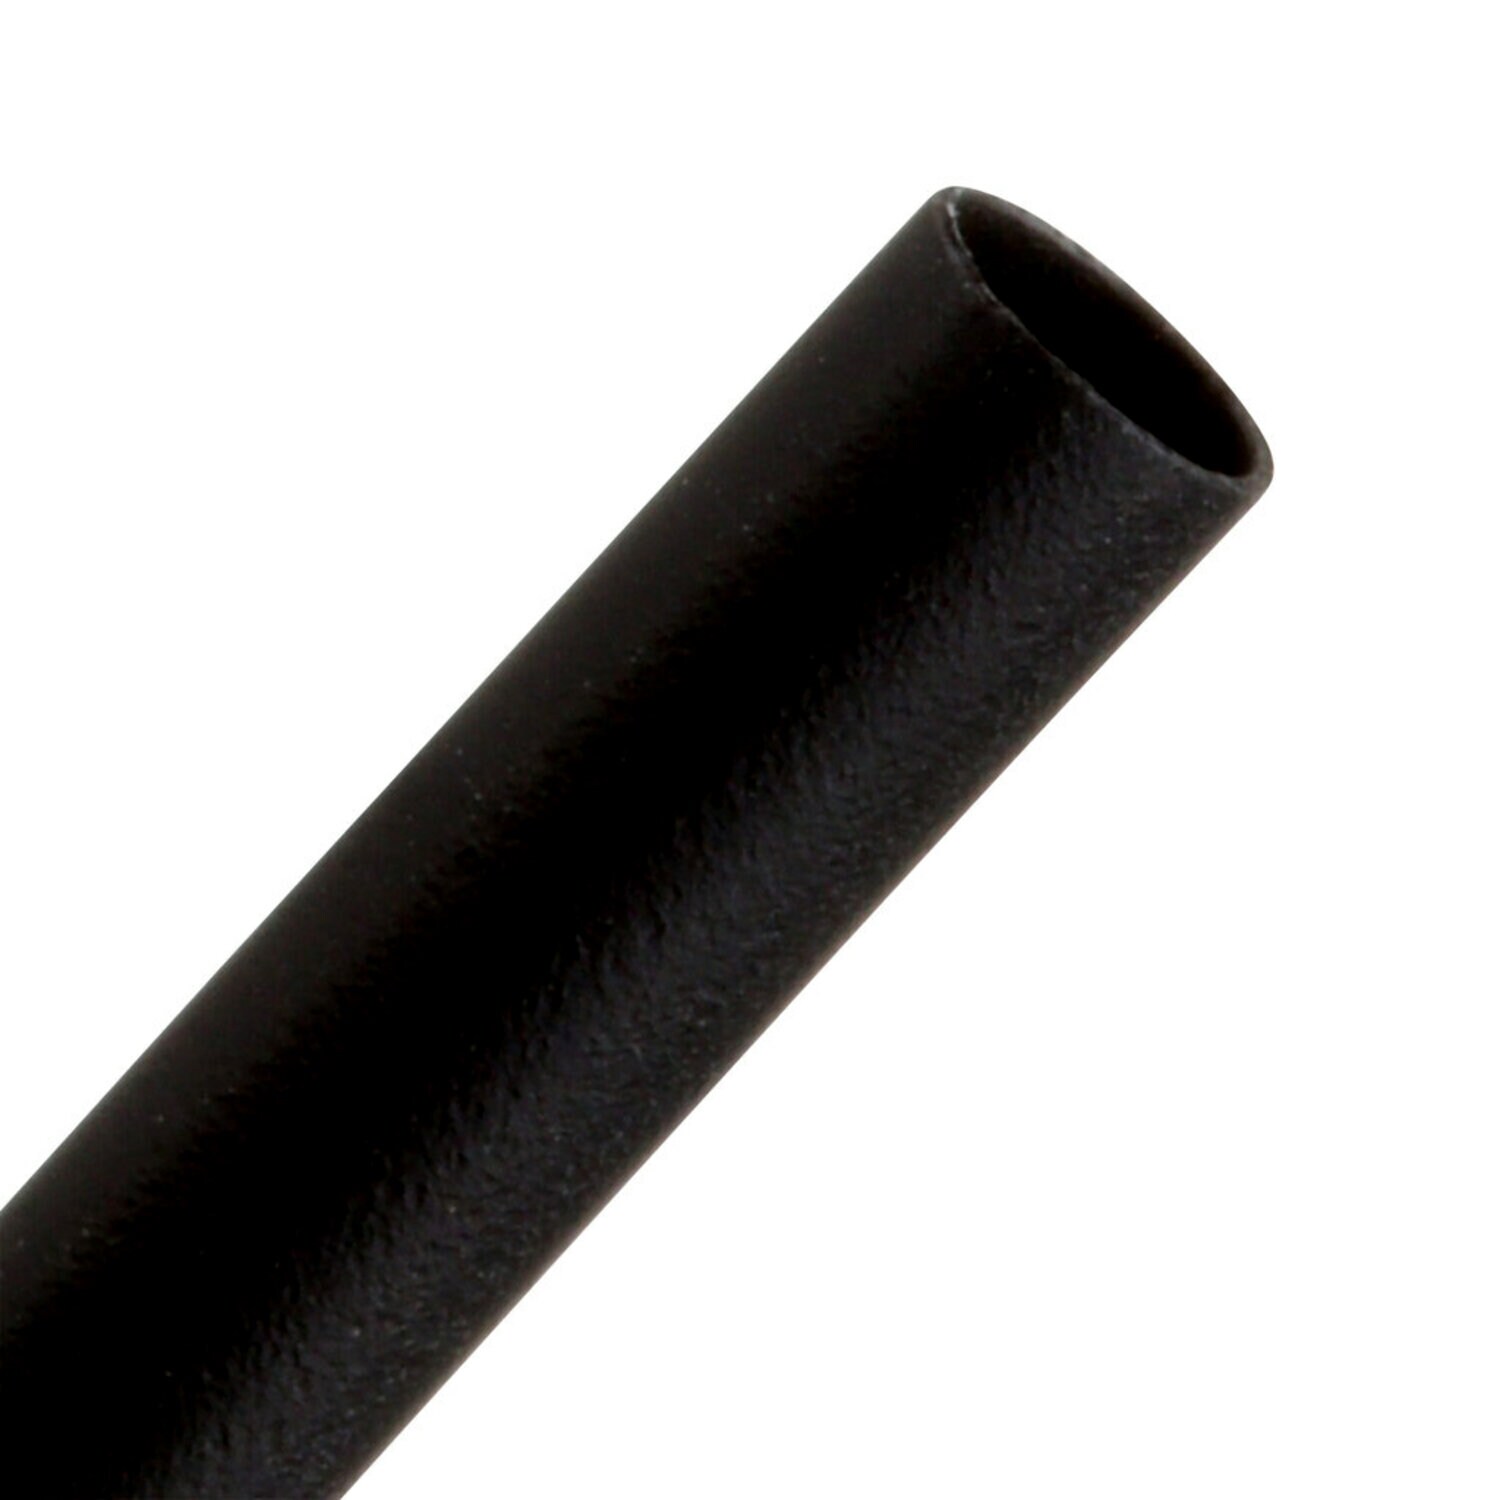 7100111119 - 3M Heat Shrink Thin-Wall Tubing FP-301-1/8-48"-Black-250 Pcs, 48 in
Length sticks, 250 pieces/case